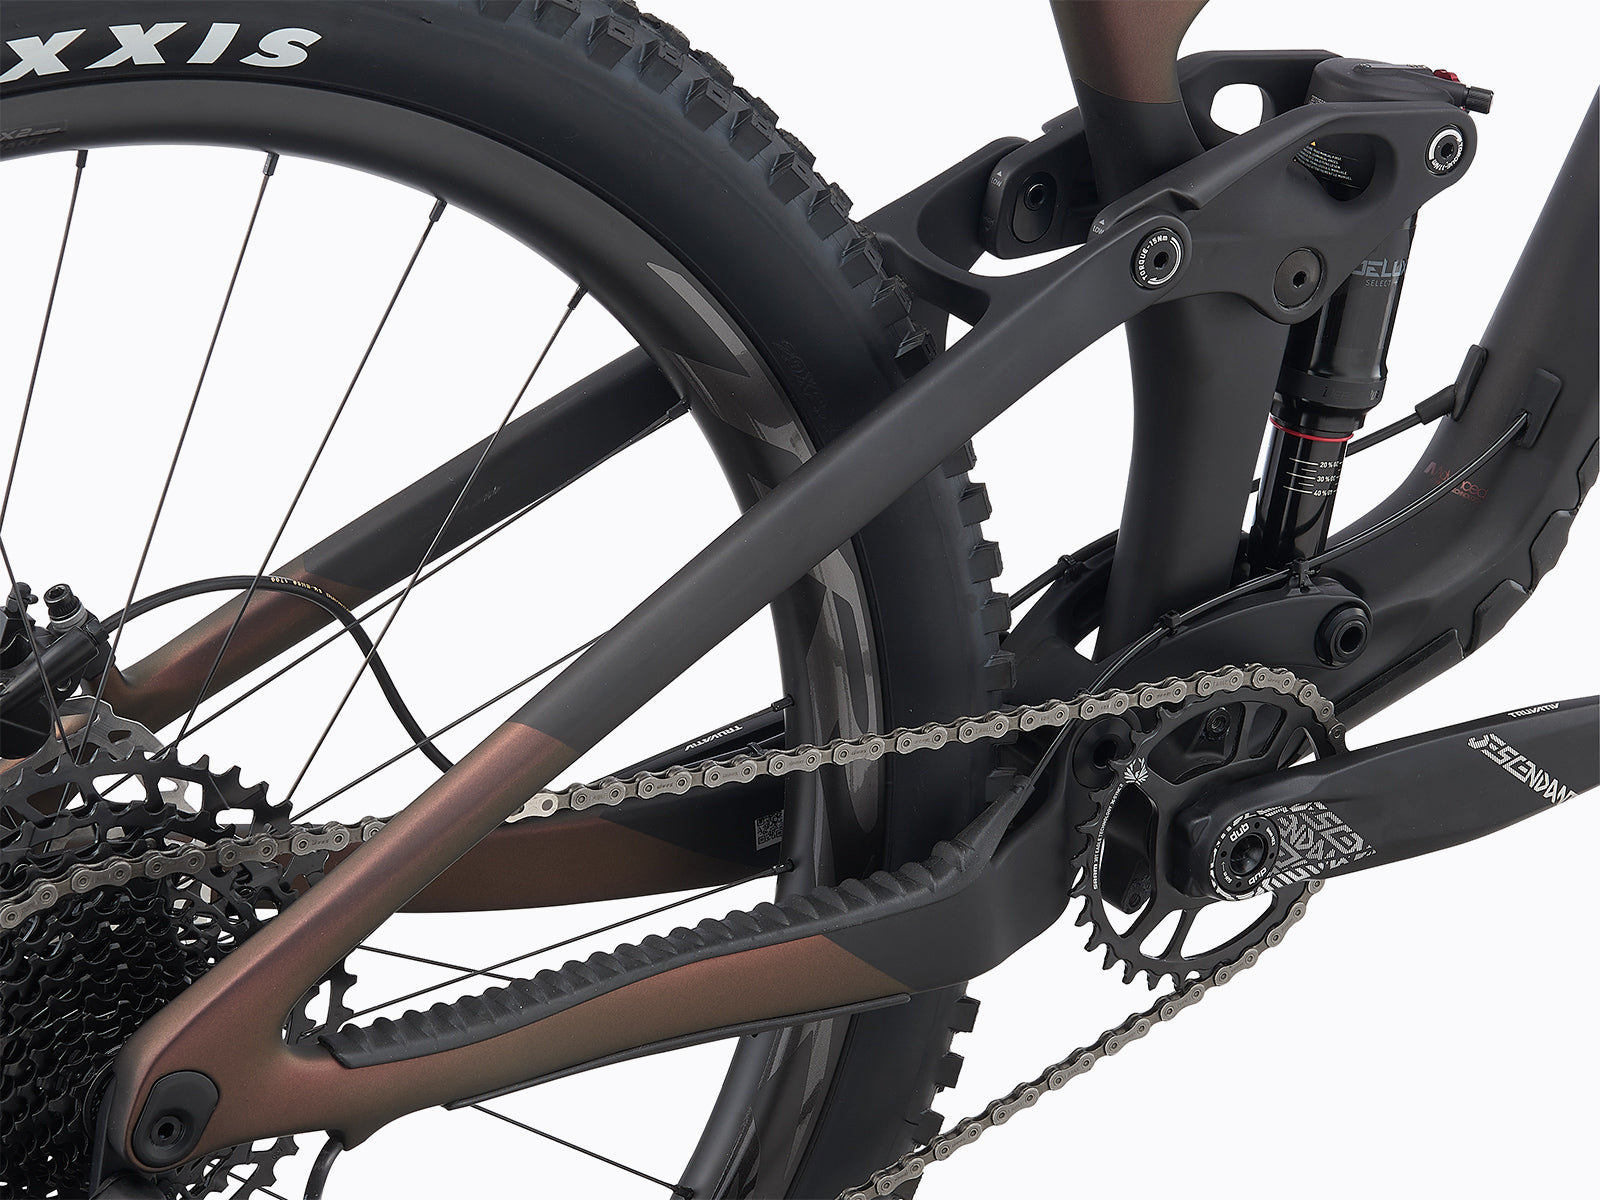 Image features a Giant Trance x advanced Pro 29 2, a hardtail mountain bike from giants trail bike collection